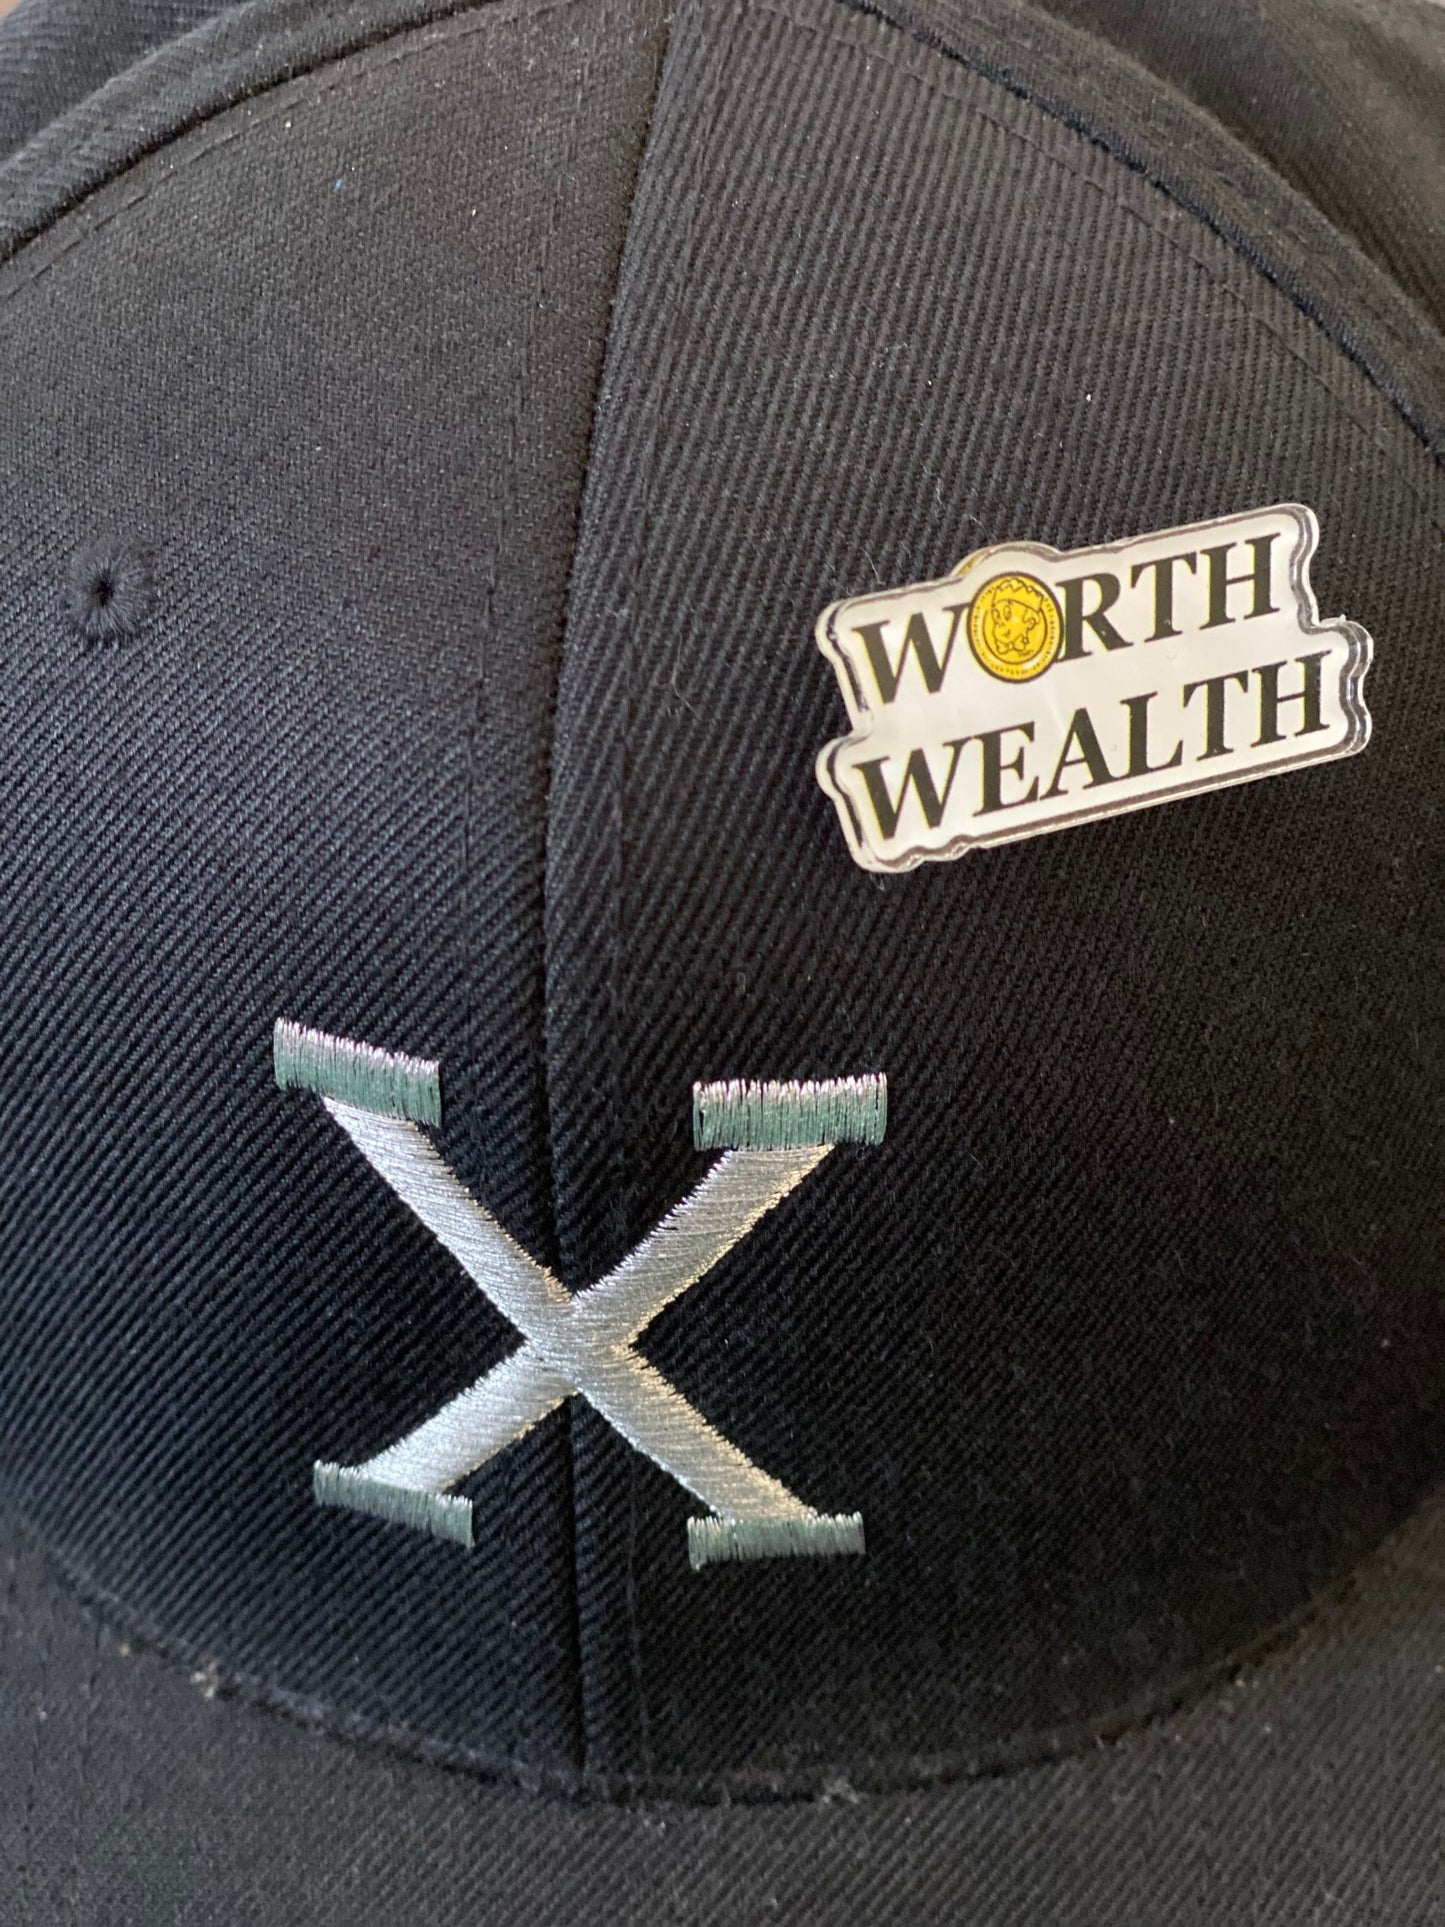 Worth over Wealth Pin